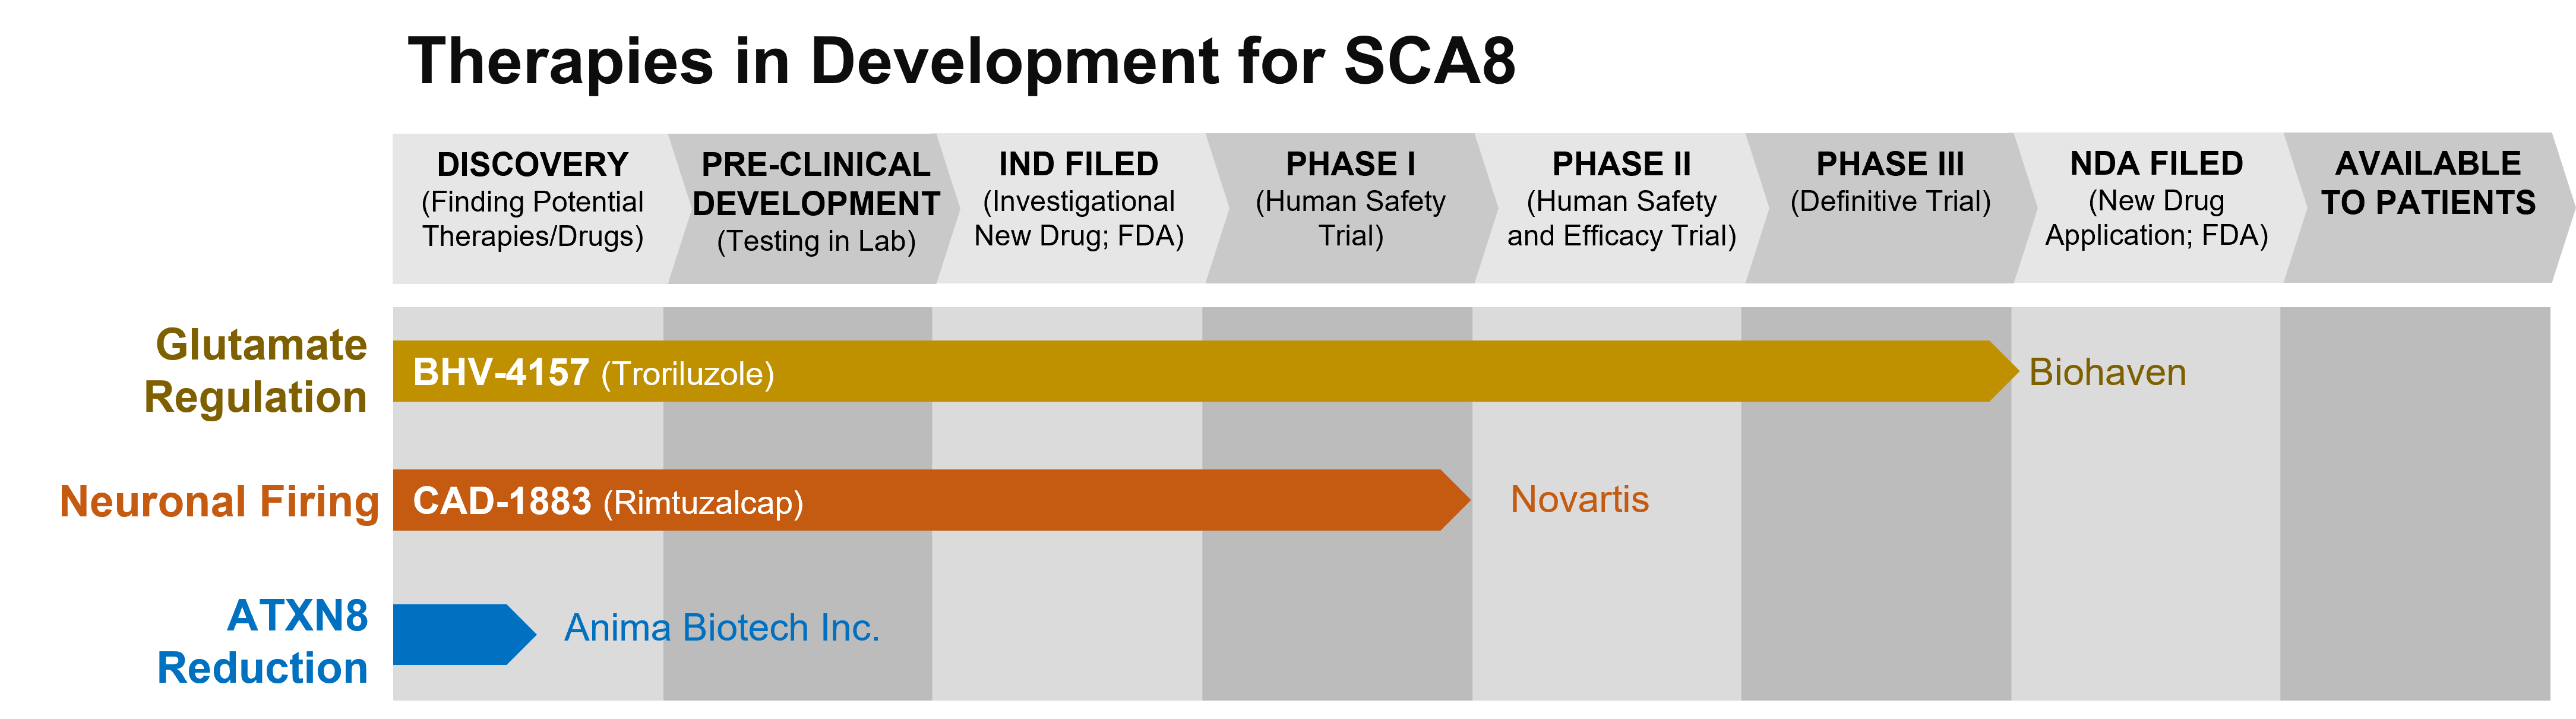 Graph depicting the phase of drug development for various drugs to treat SCA8